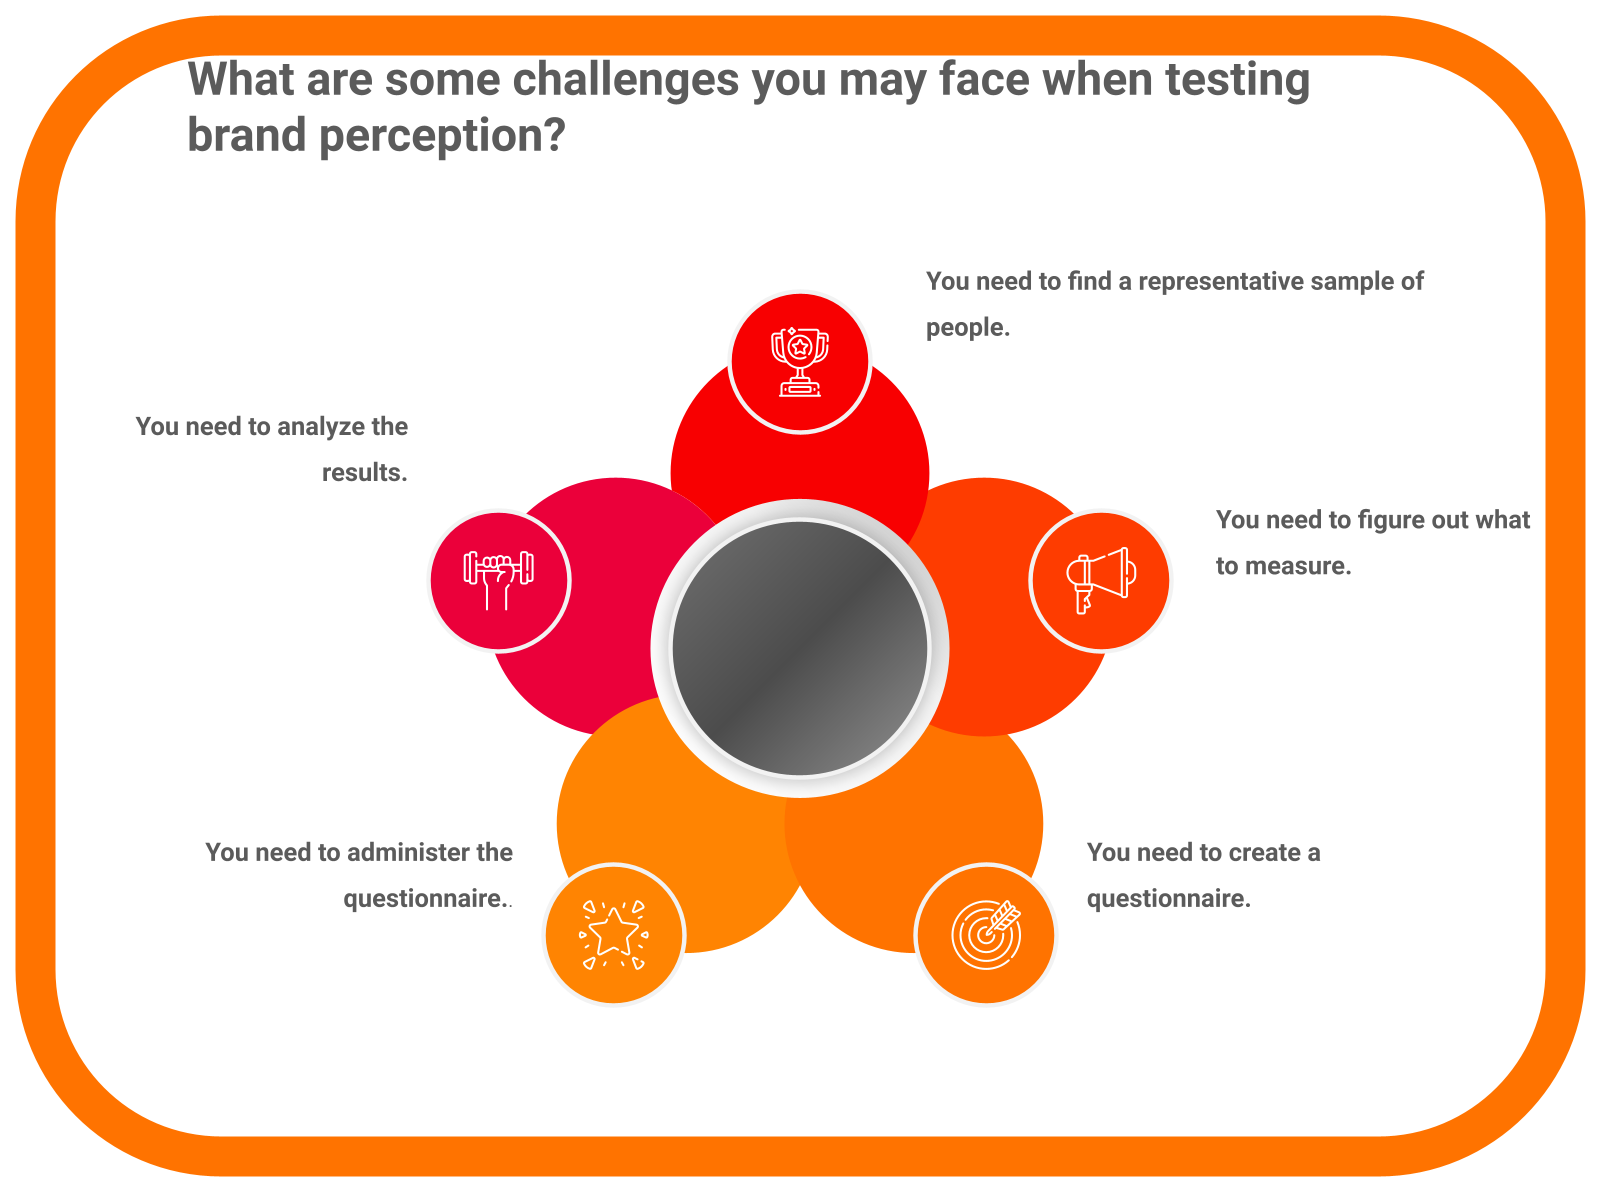 What are some challenges you may face when testing brand perception?